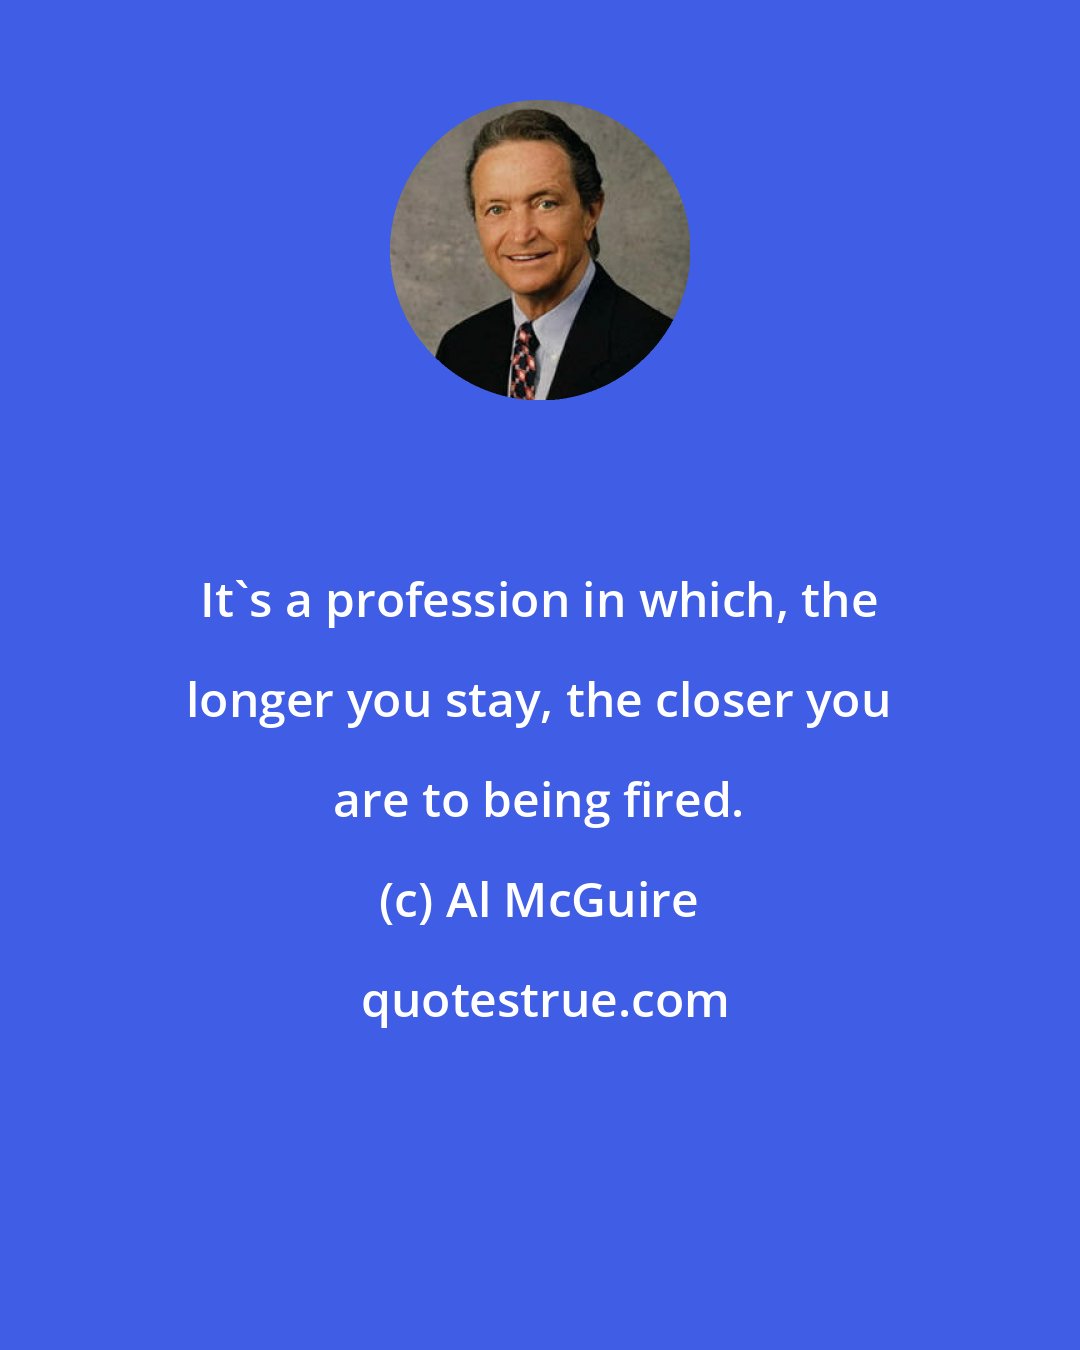 Al McGuire: It's a profession in which, the longer you stay, the closer you are to being fired.